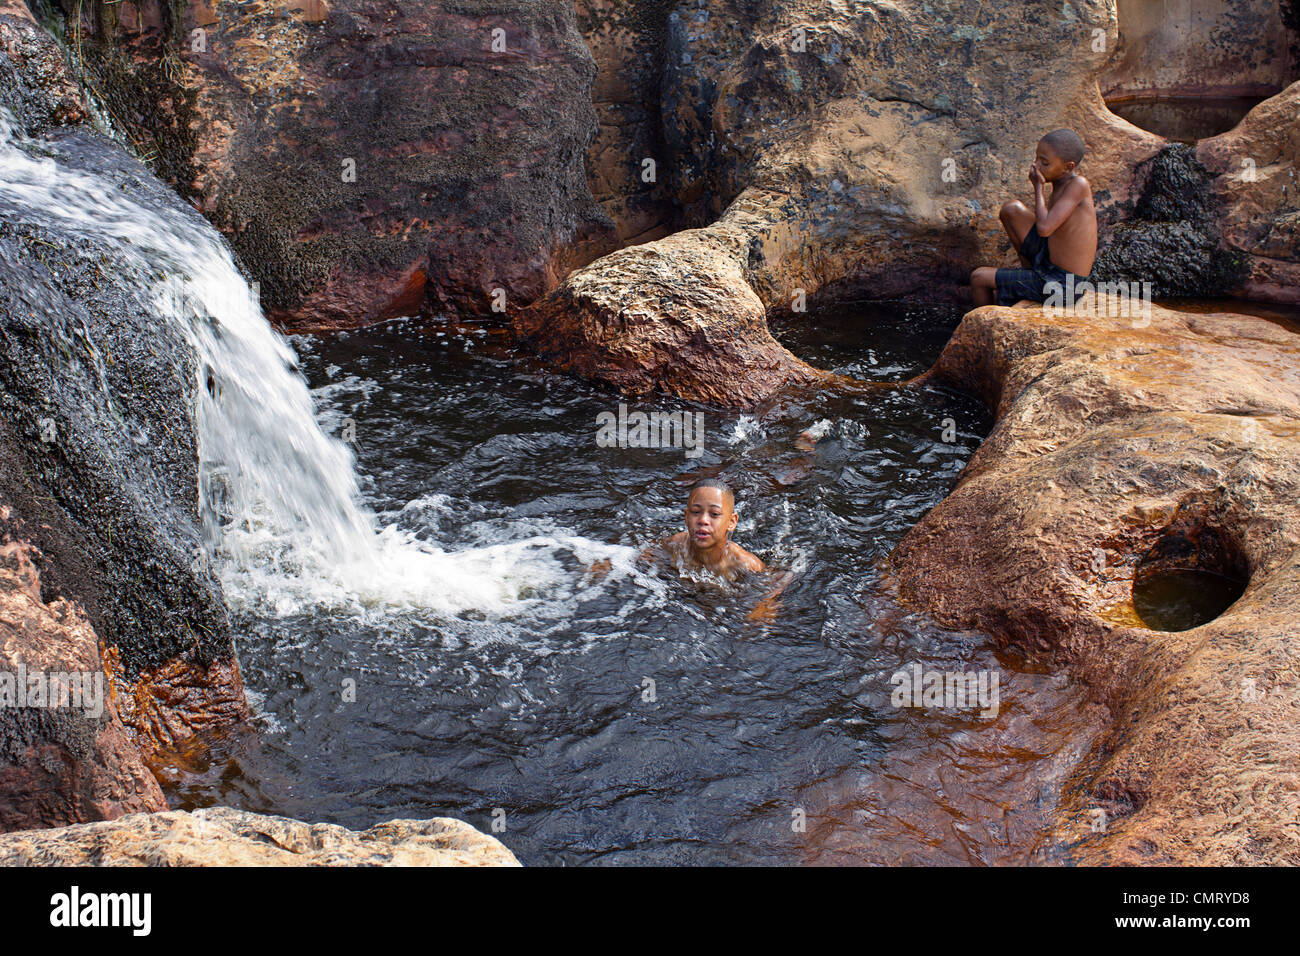 3 young South African children swimming in a rock pool beside a waterfall Stock Photo